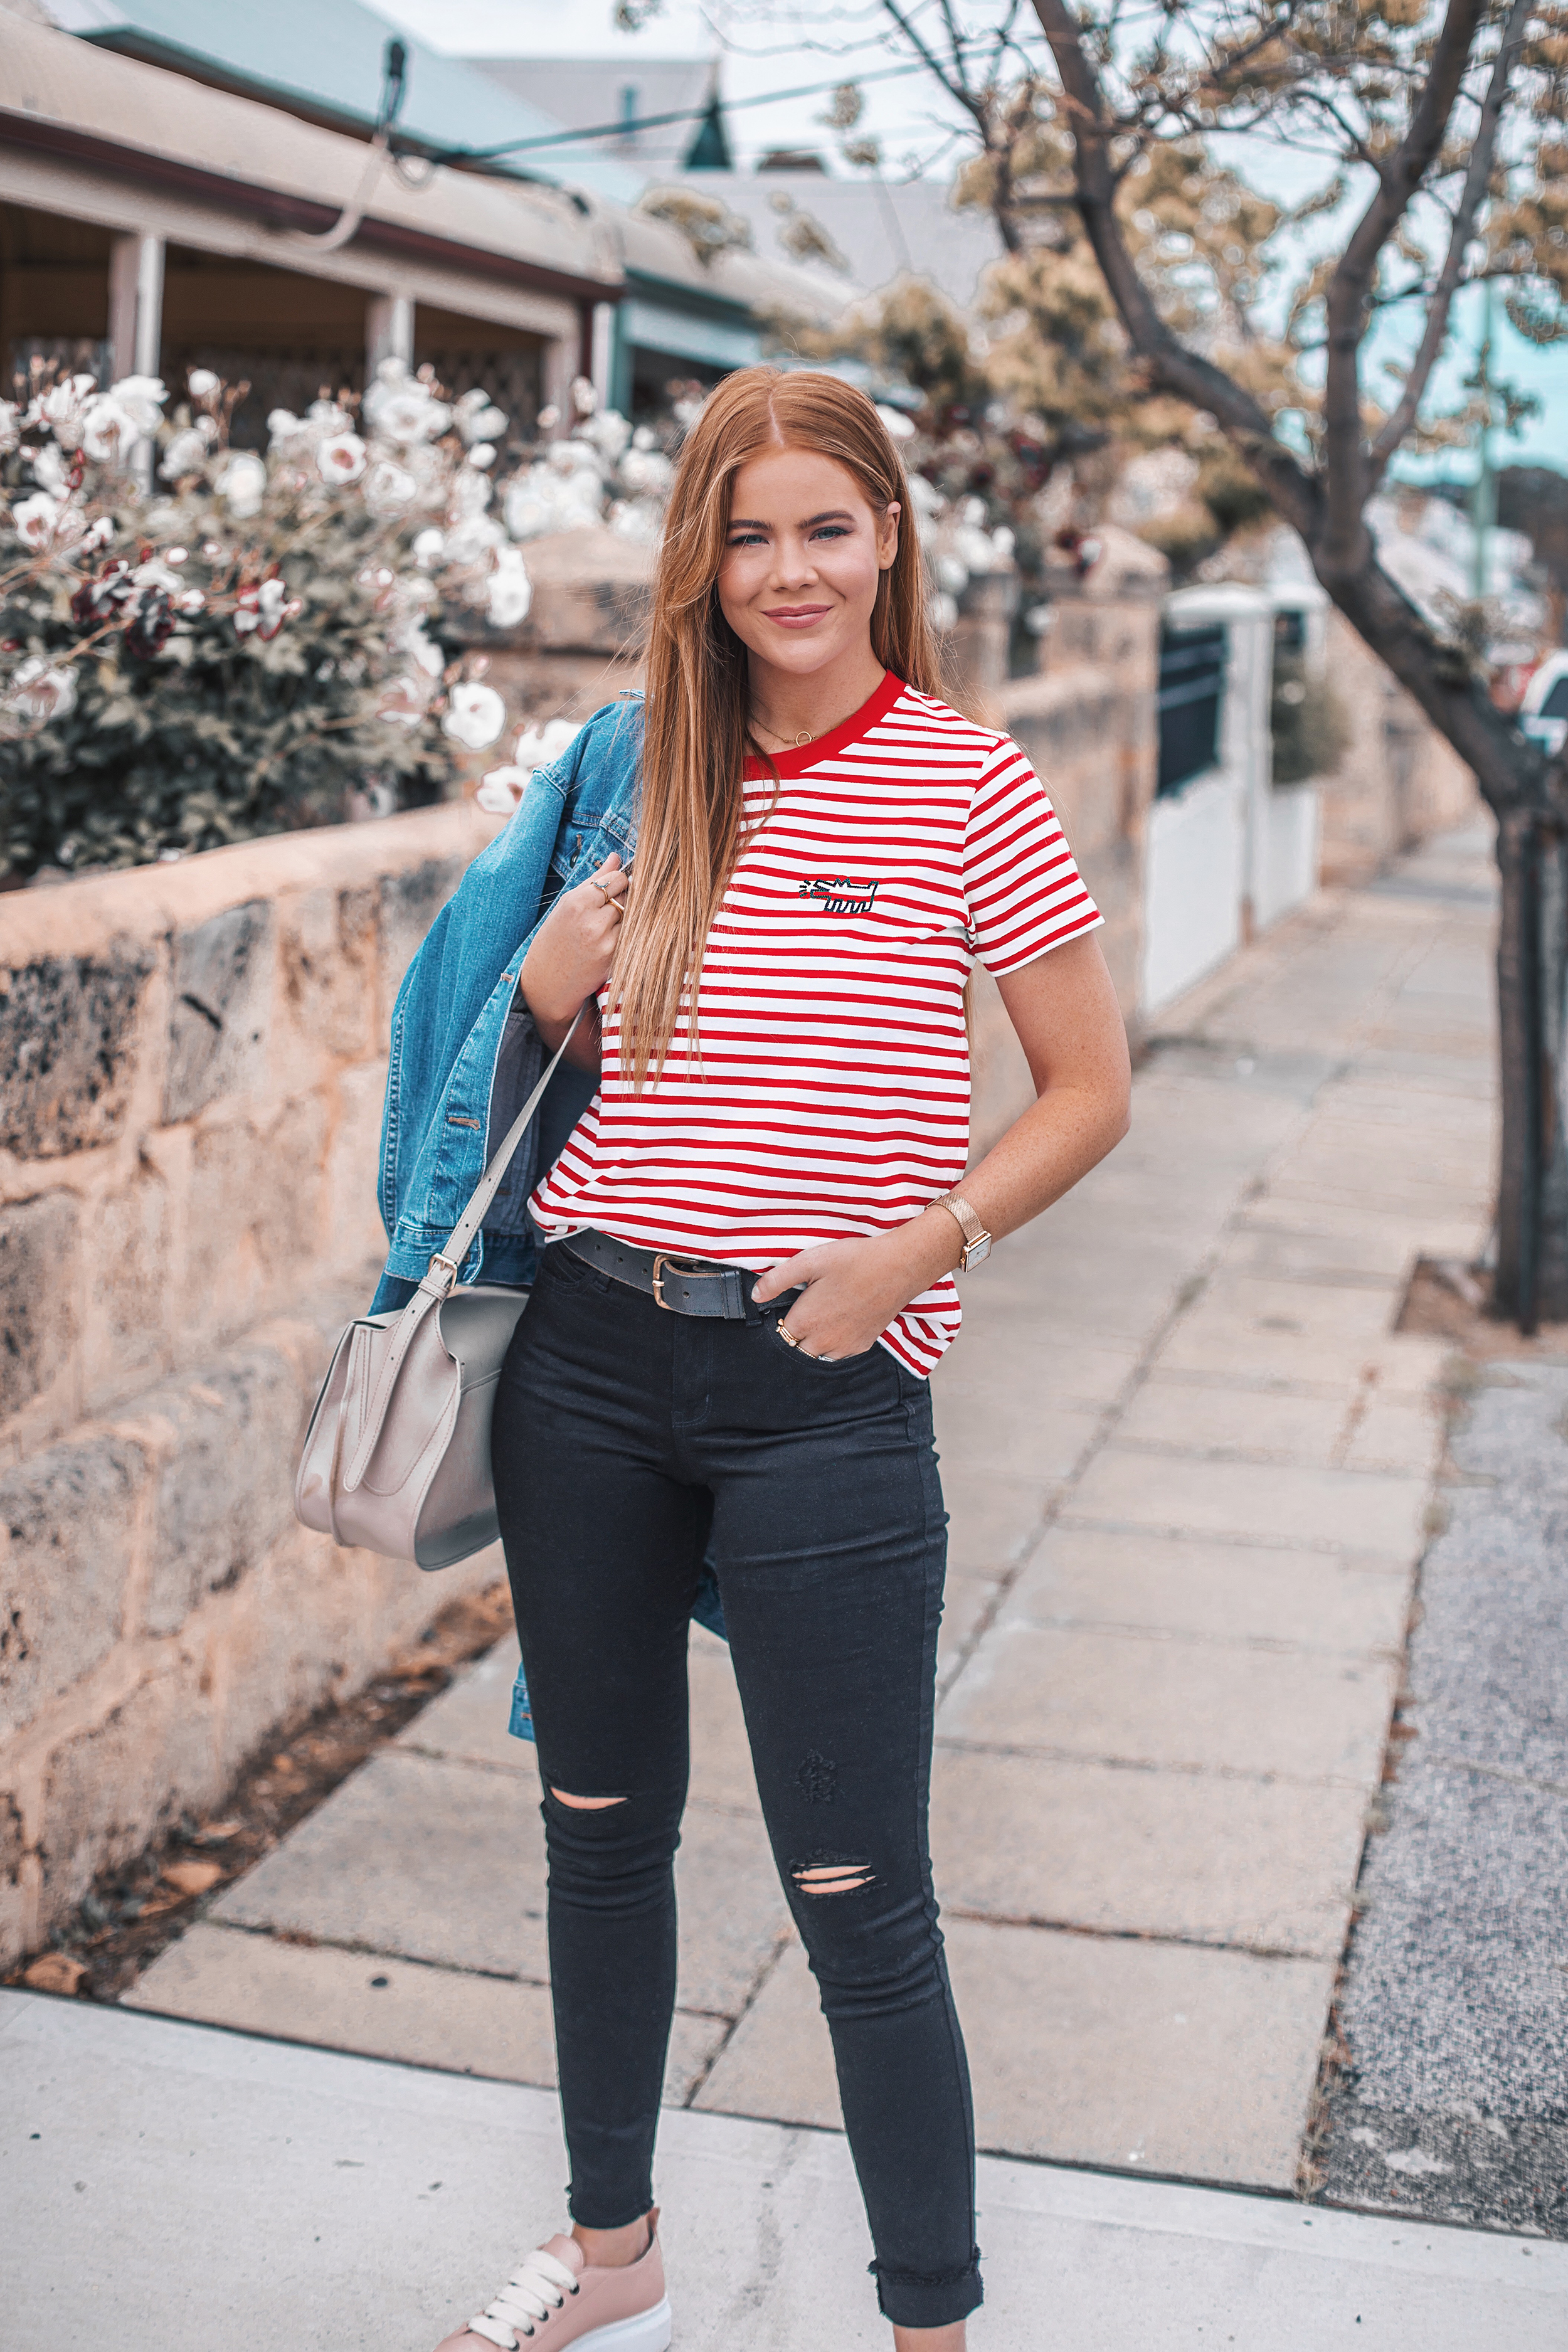 Keeping Comfy in Tees and Jeans — Lion in the Wild